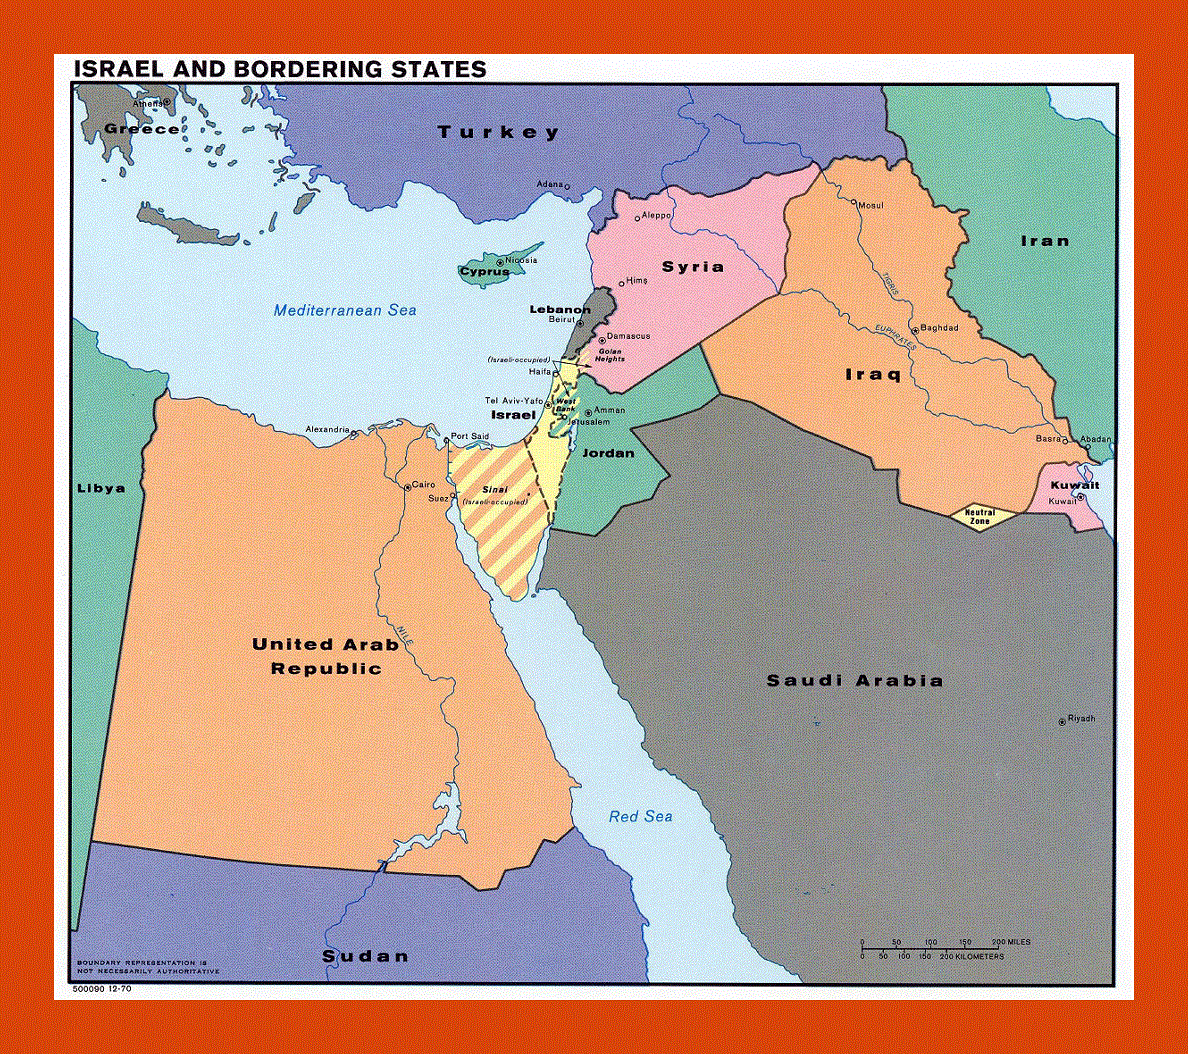 Map of Israel and Bordering States - 1970